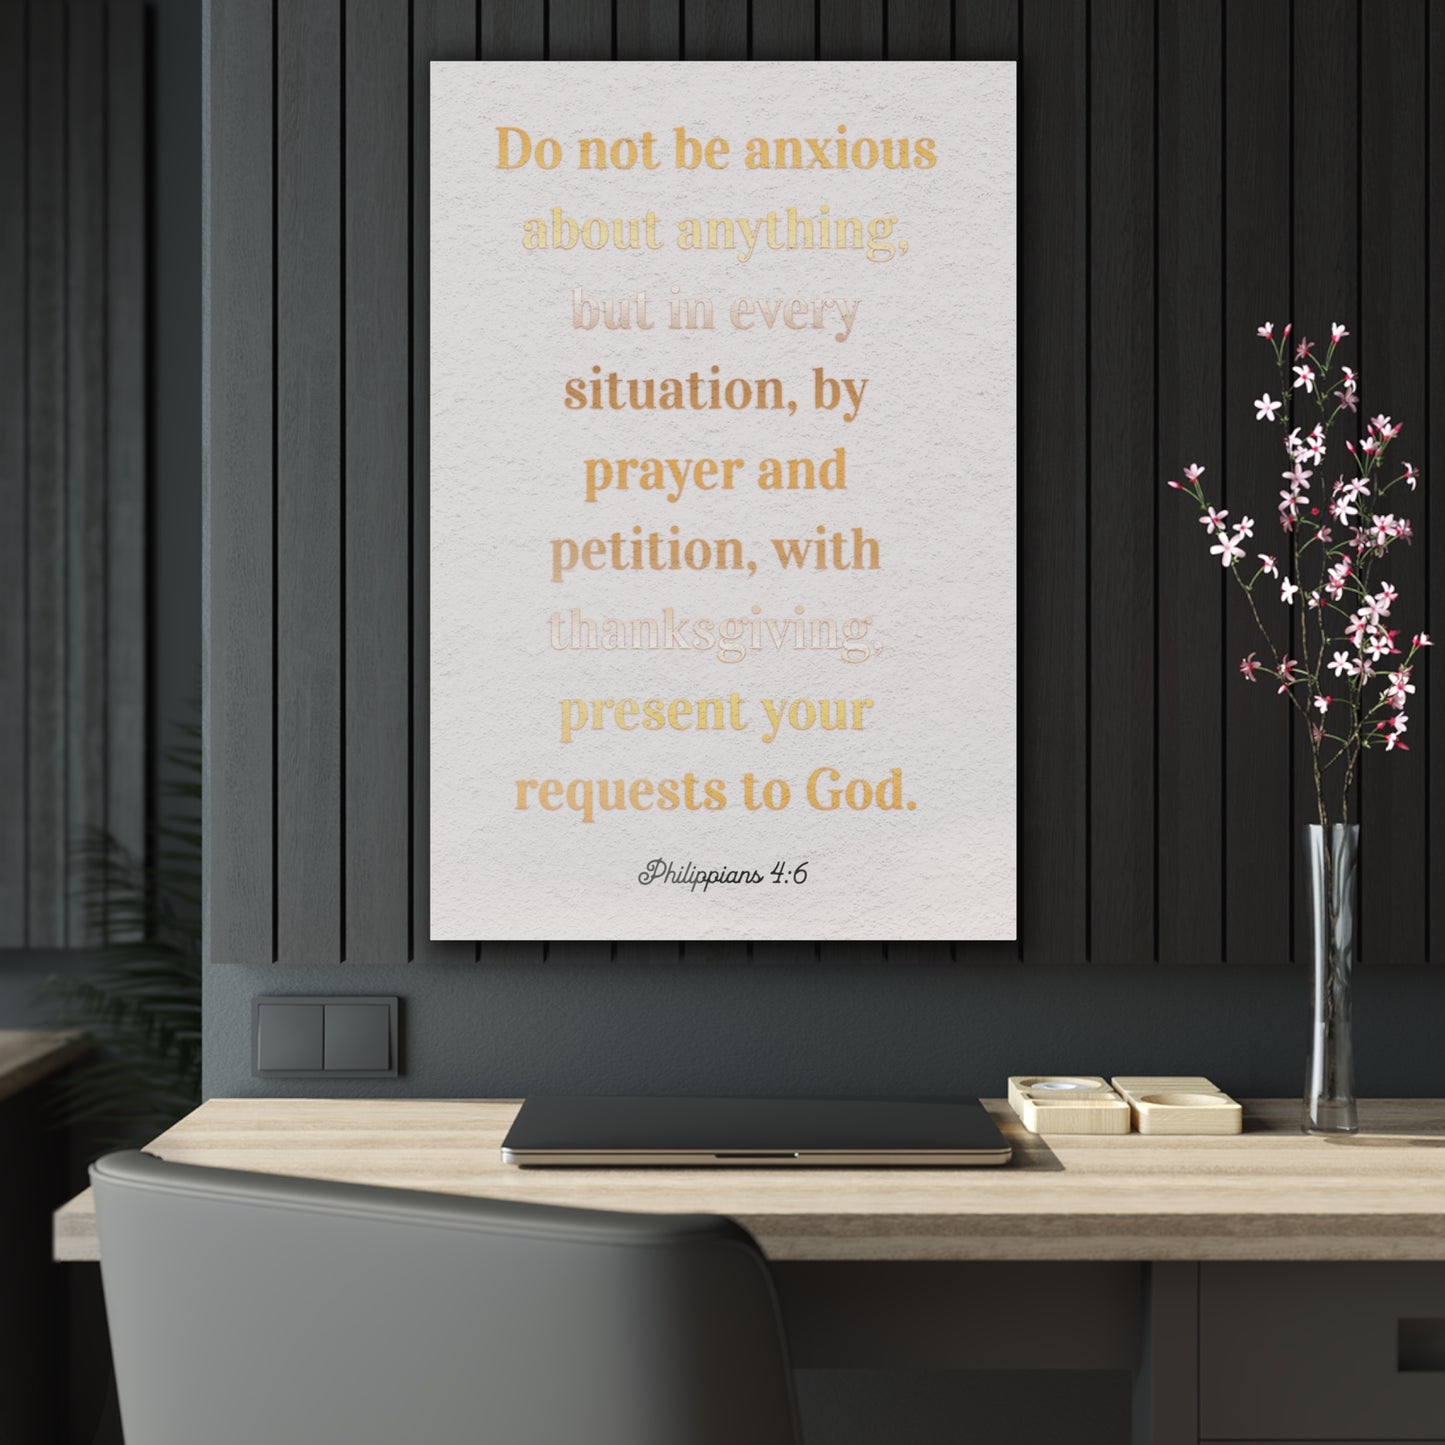 Scripture Quote Wall Art - Acrylic Wall Print with Inspirational Verse | Art & Wall Decor,Assembled in the USA,Assembled in USA,Decor,Home & Living,Home Decor,Indoor,Made in the USA,Made in USA,Poster